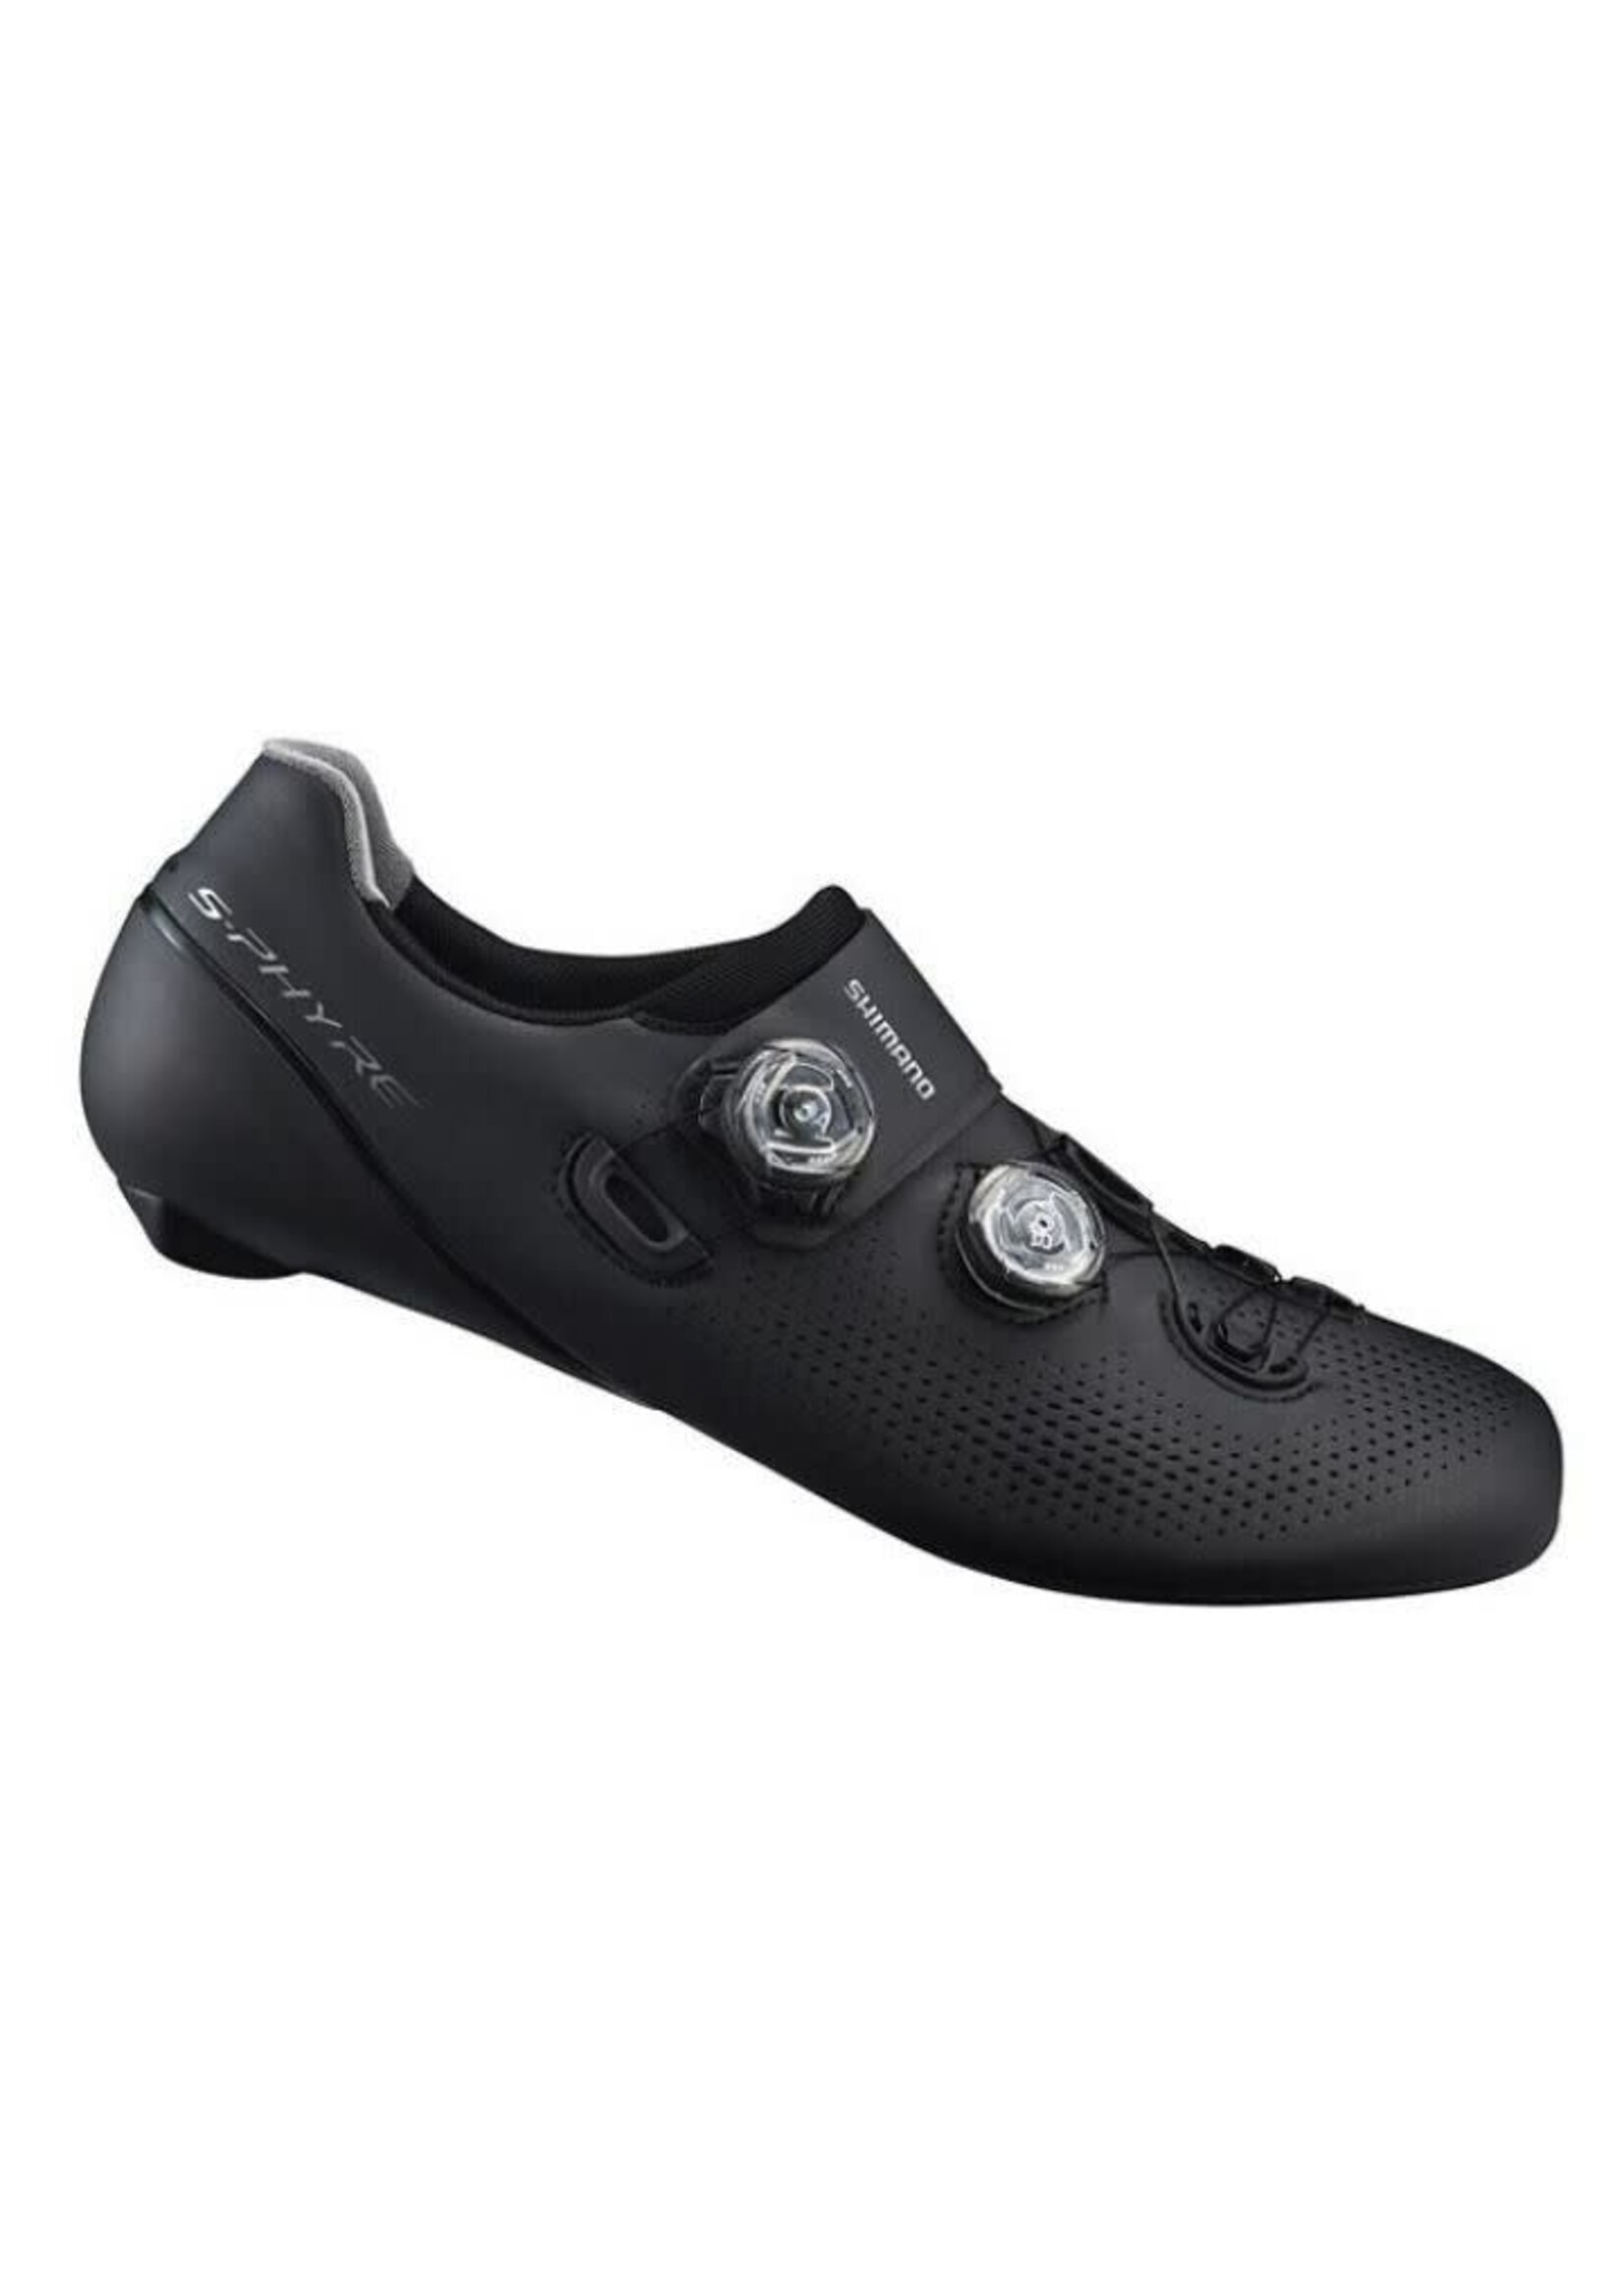 Shimano SH-RC901 S-PHYRE BICYCLE SHOES BLACK 39.0